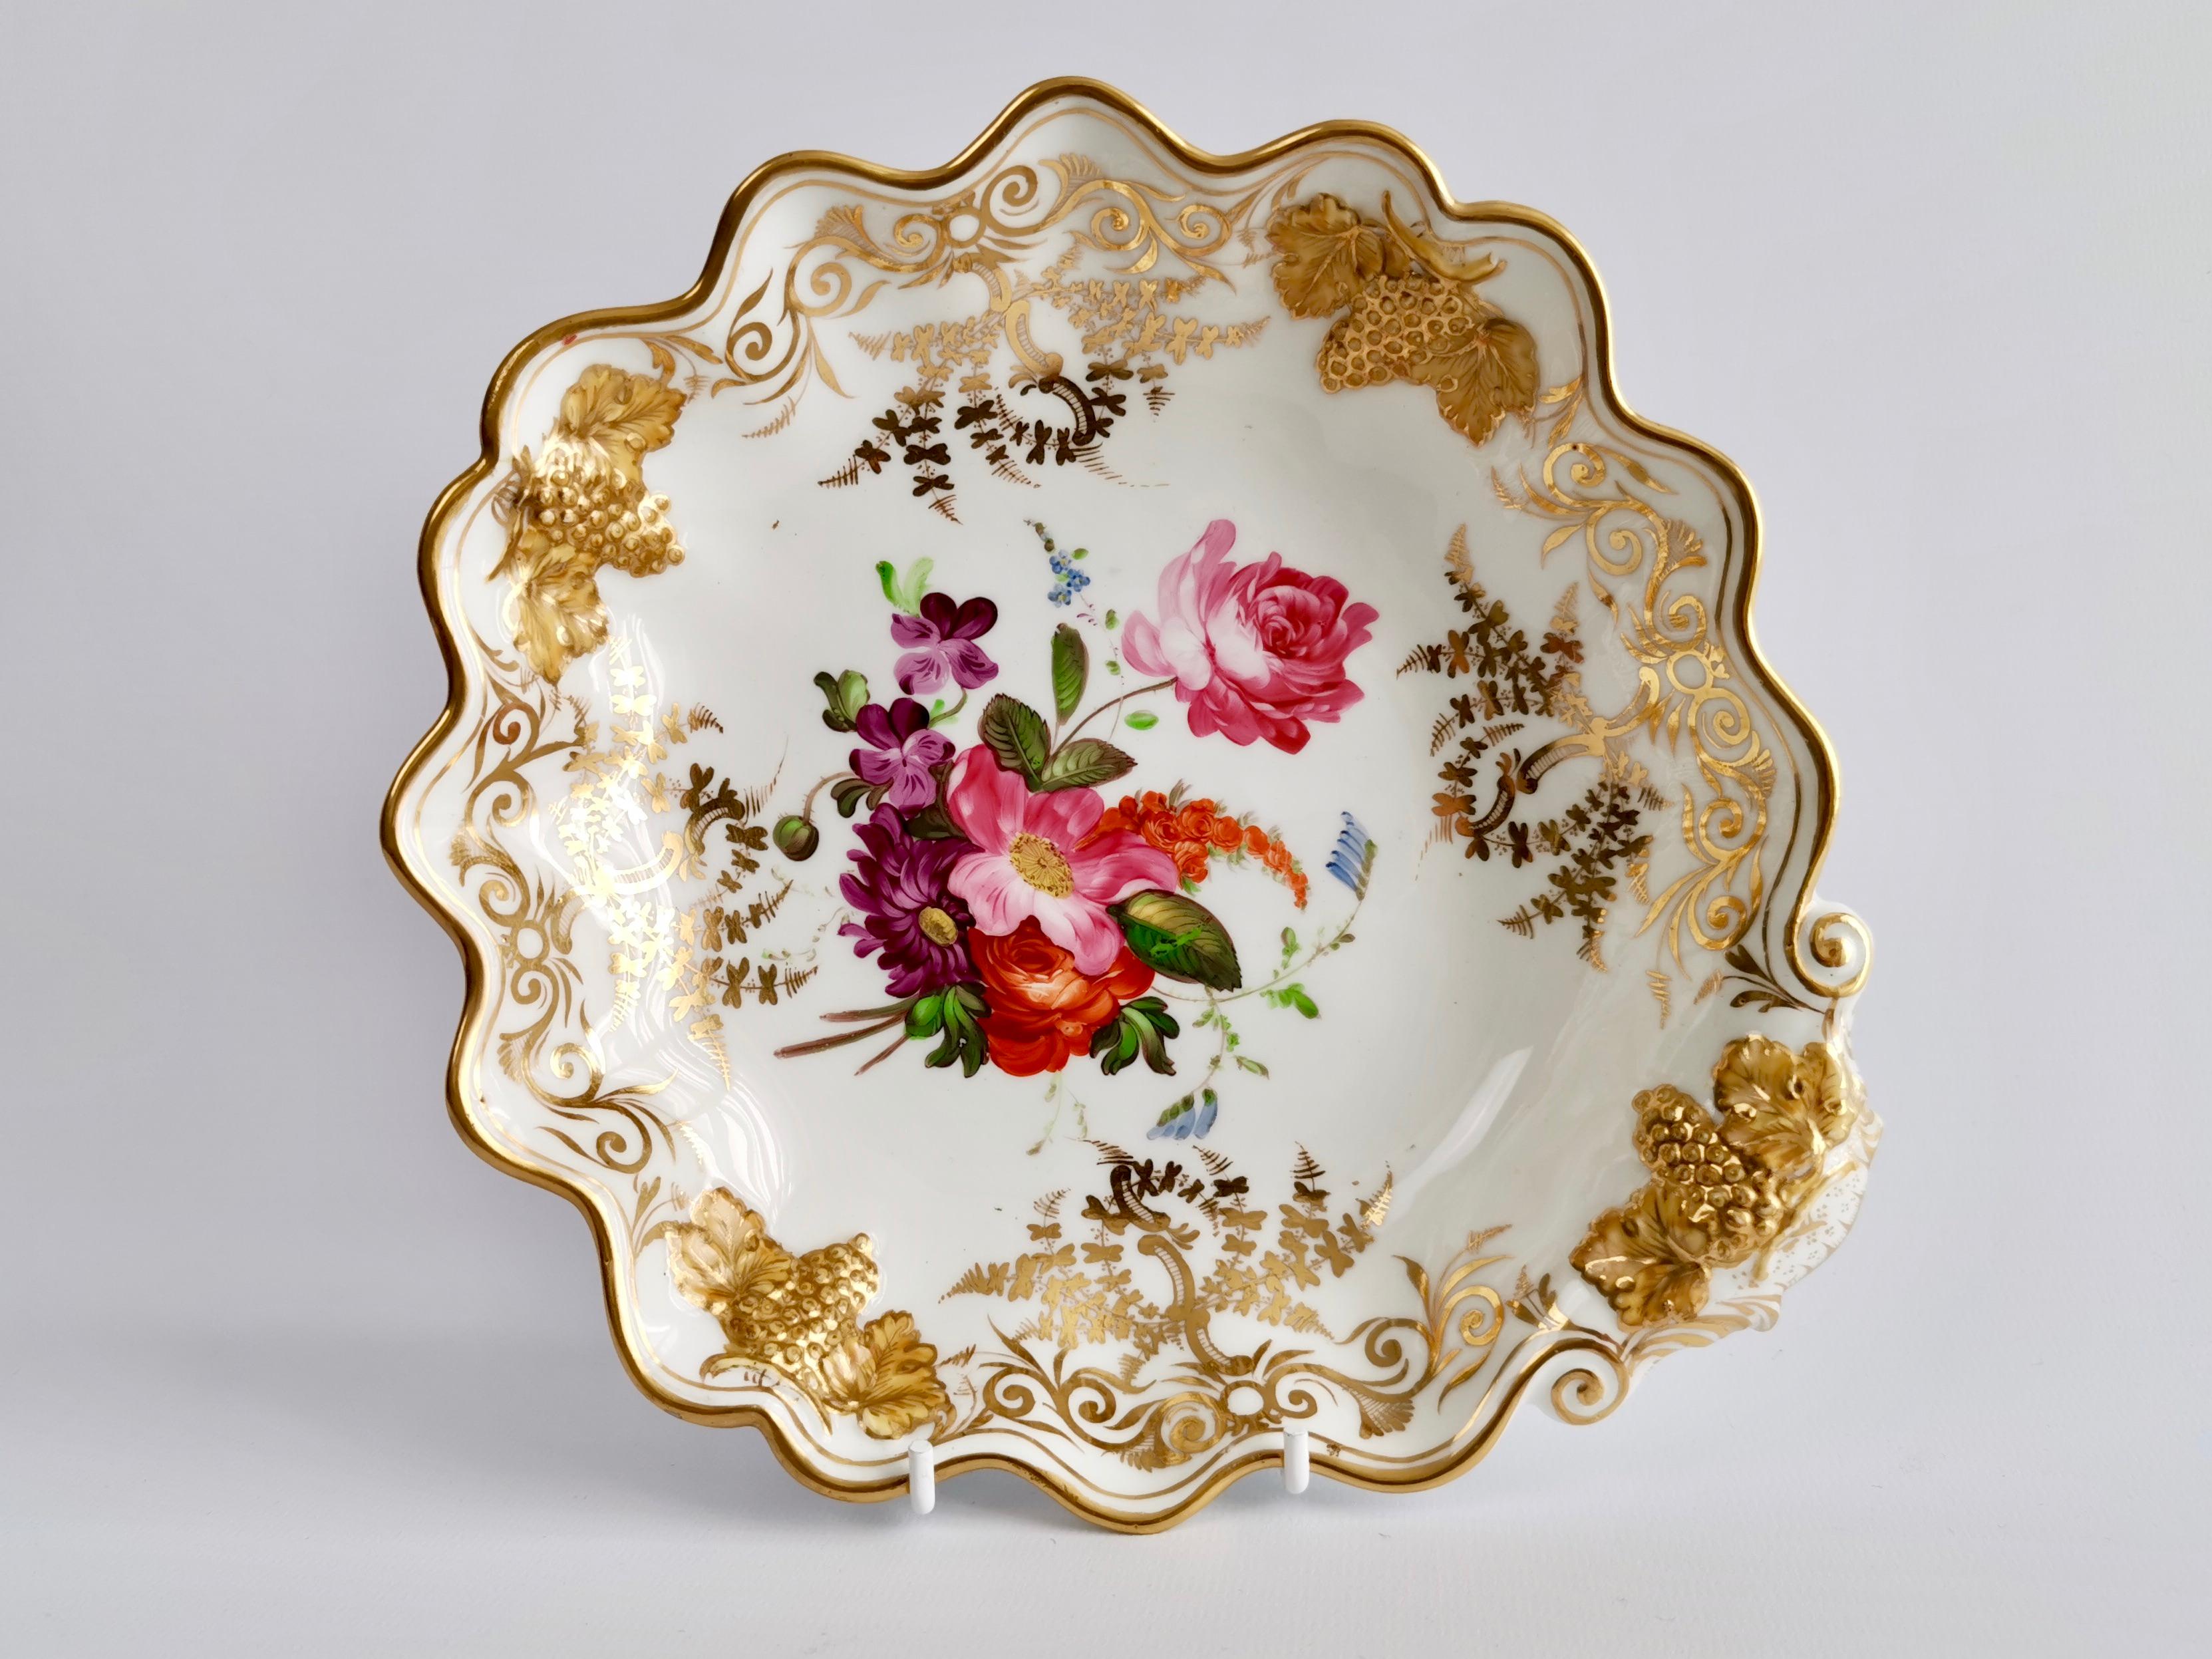 Hand-Painted Set of Coalport Dessert Dishes, Grape-moulded, Gilt and Flowers, circa 1820